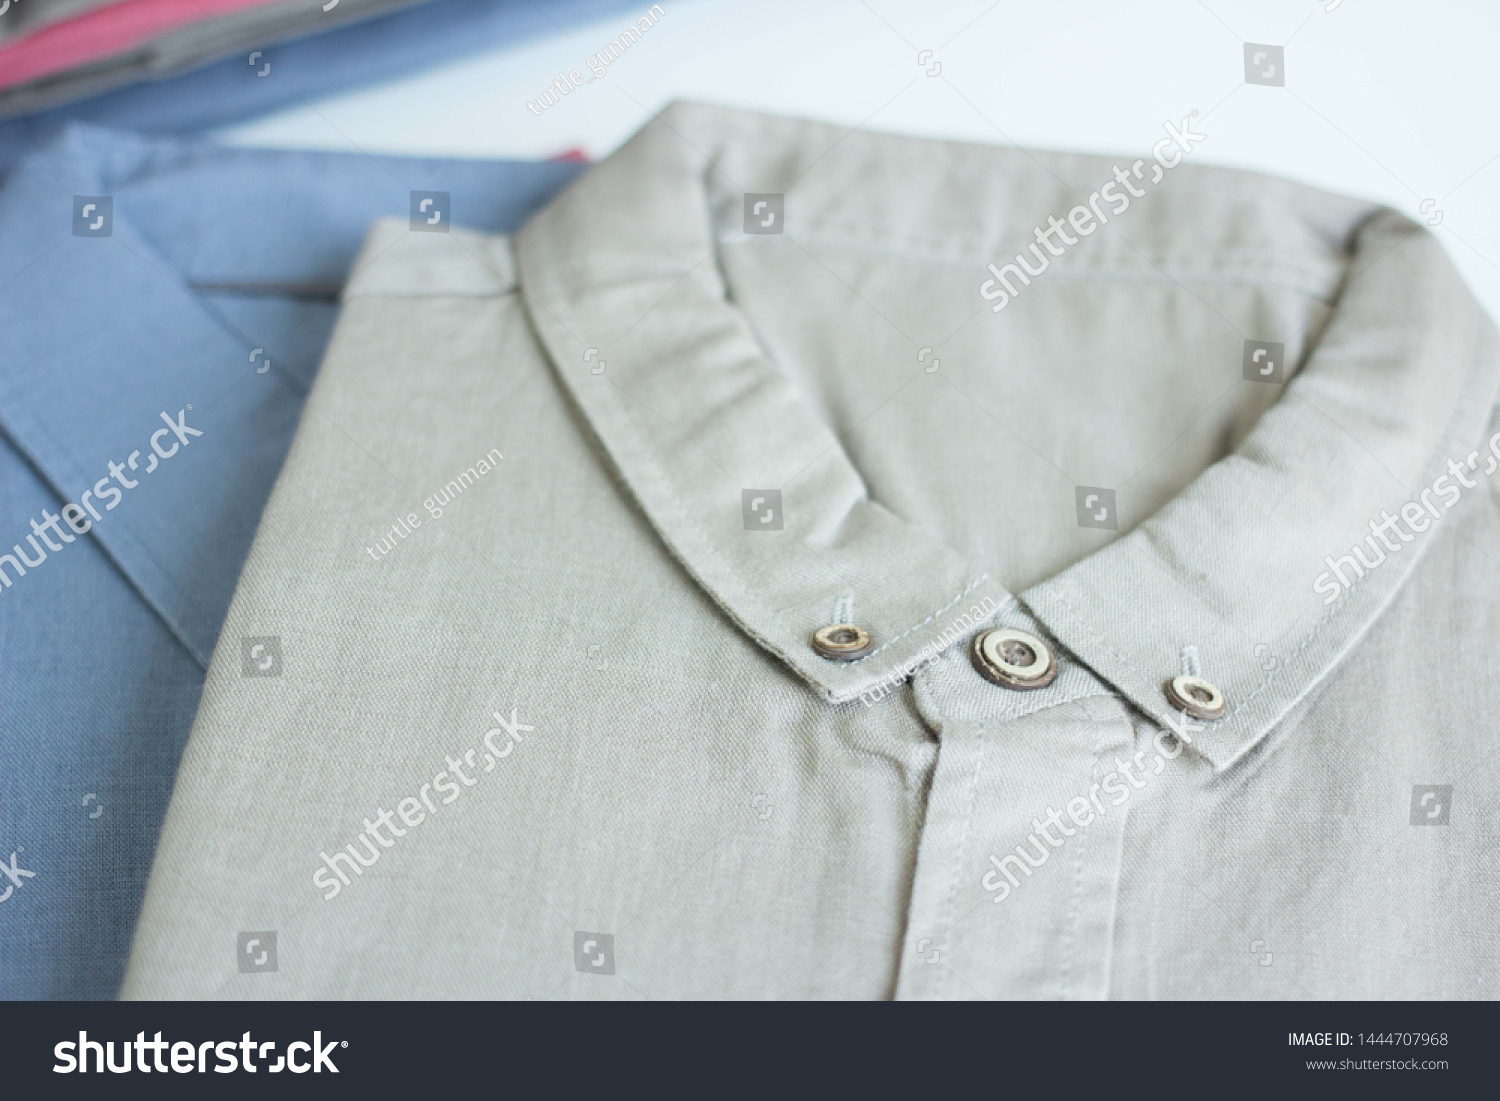 Women and men casual style shirt colour mix in white background #1444707968